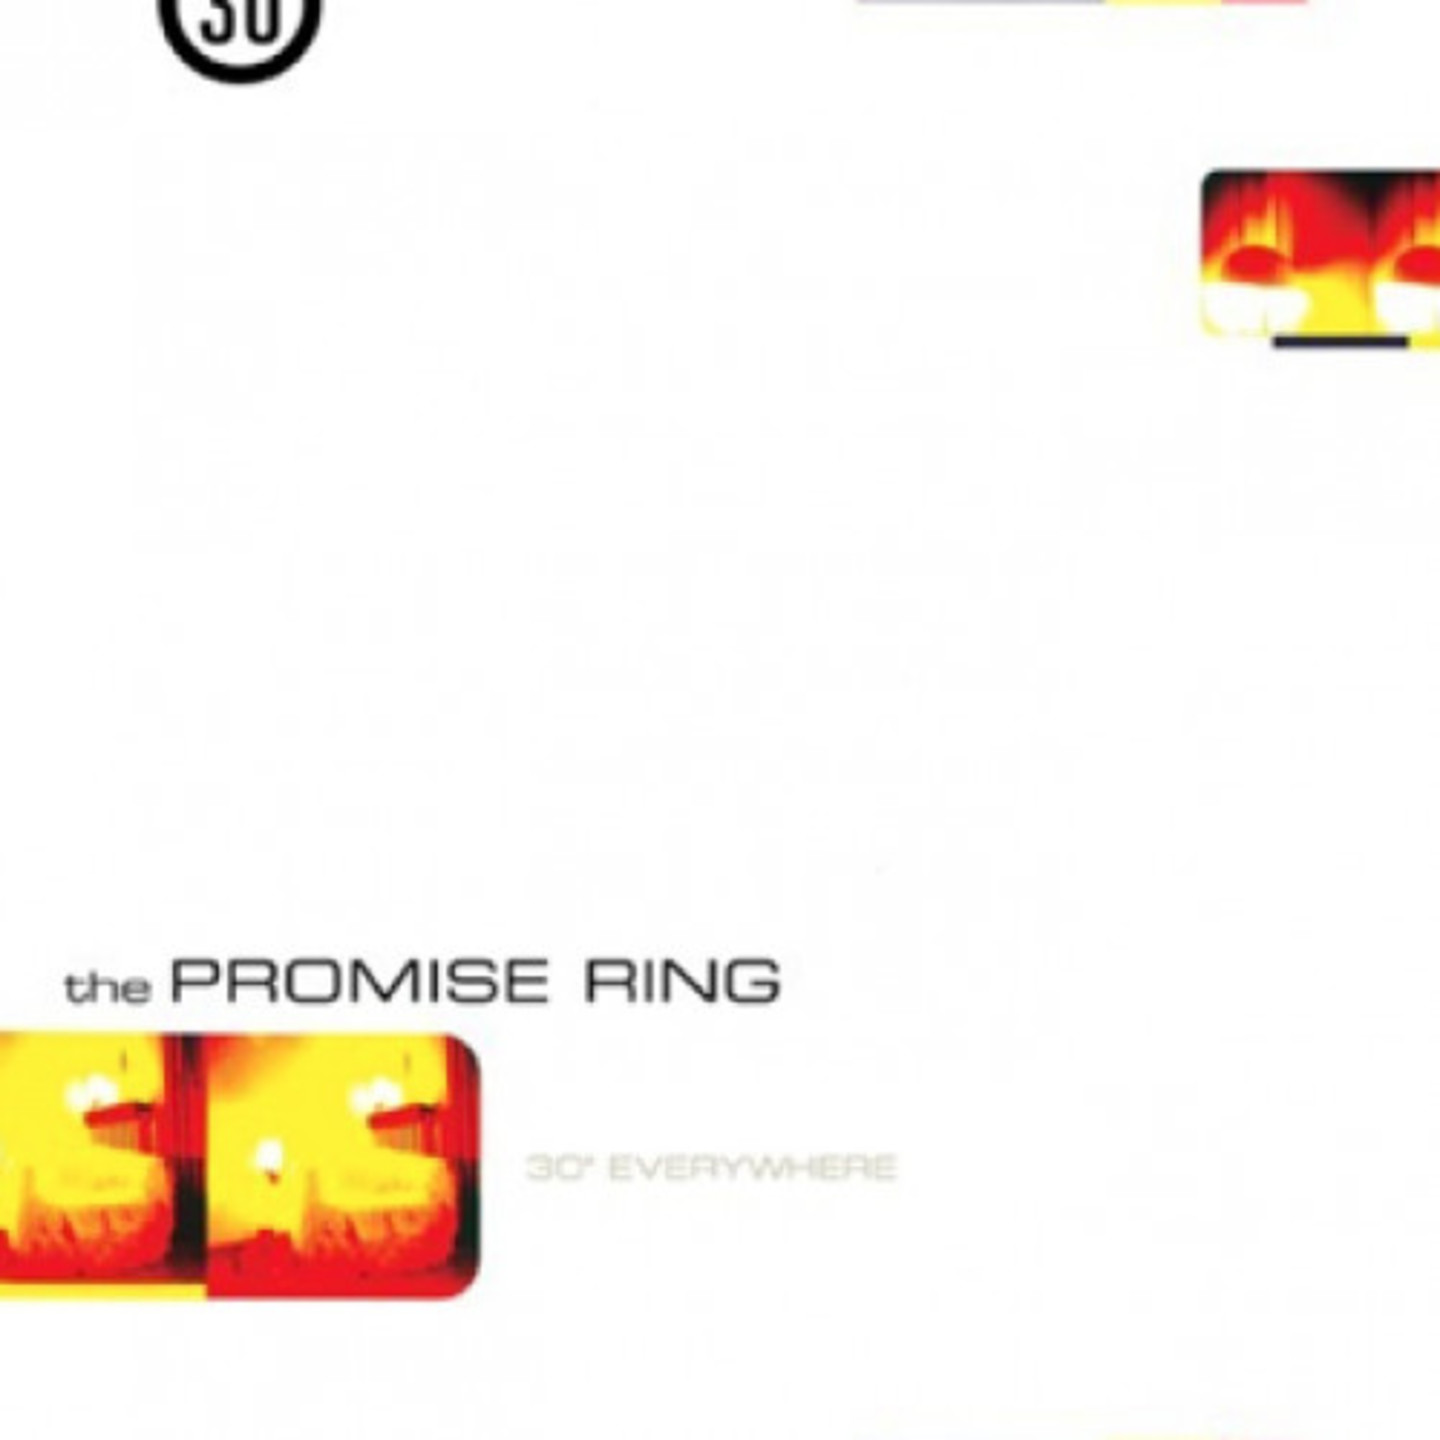 PROMISE RING, THE - 30 Degrees Everywhere LP